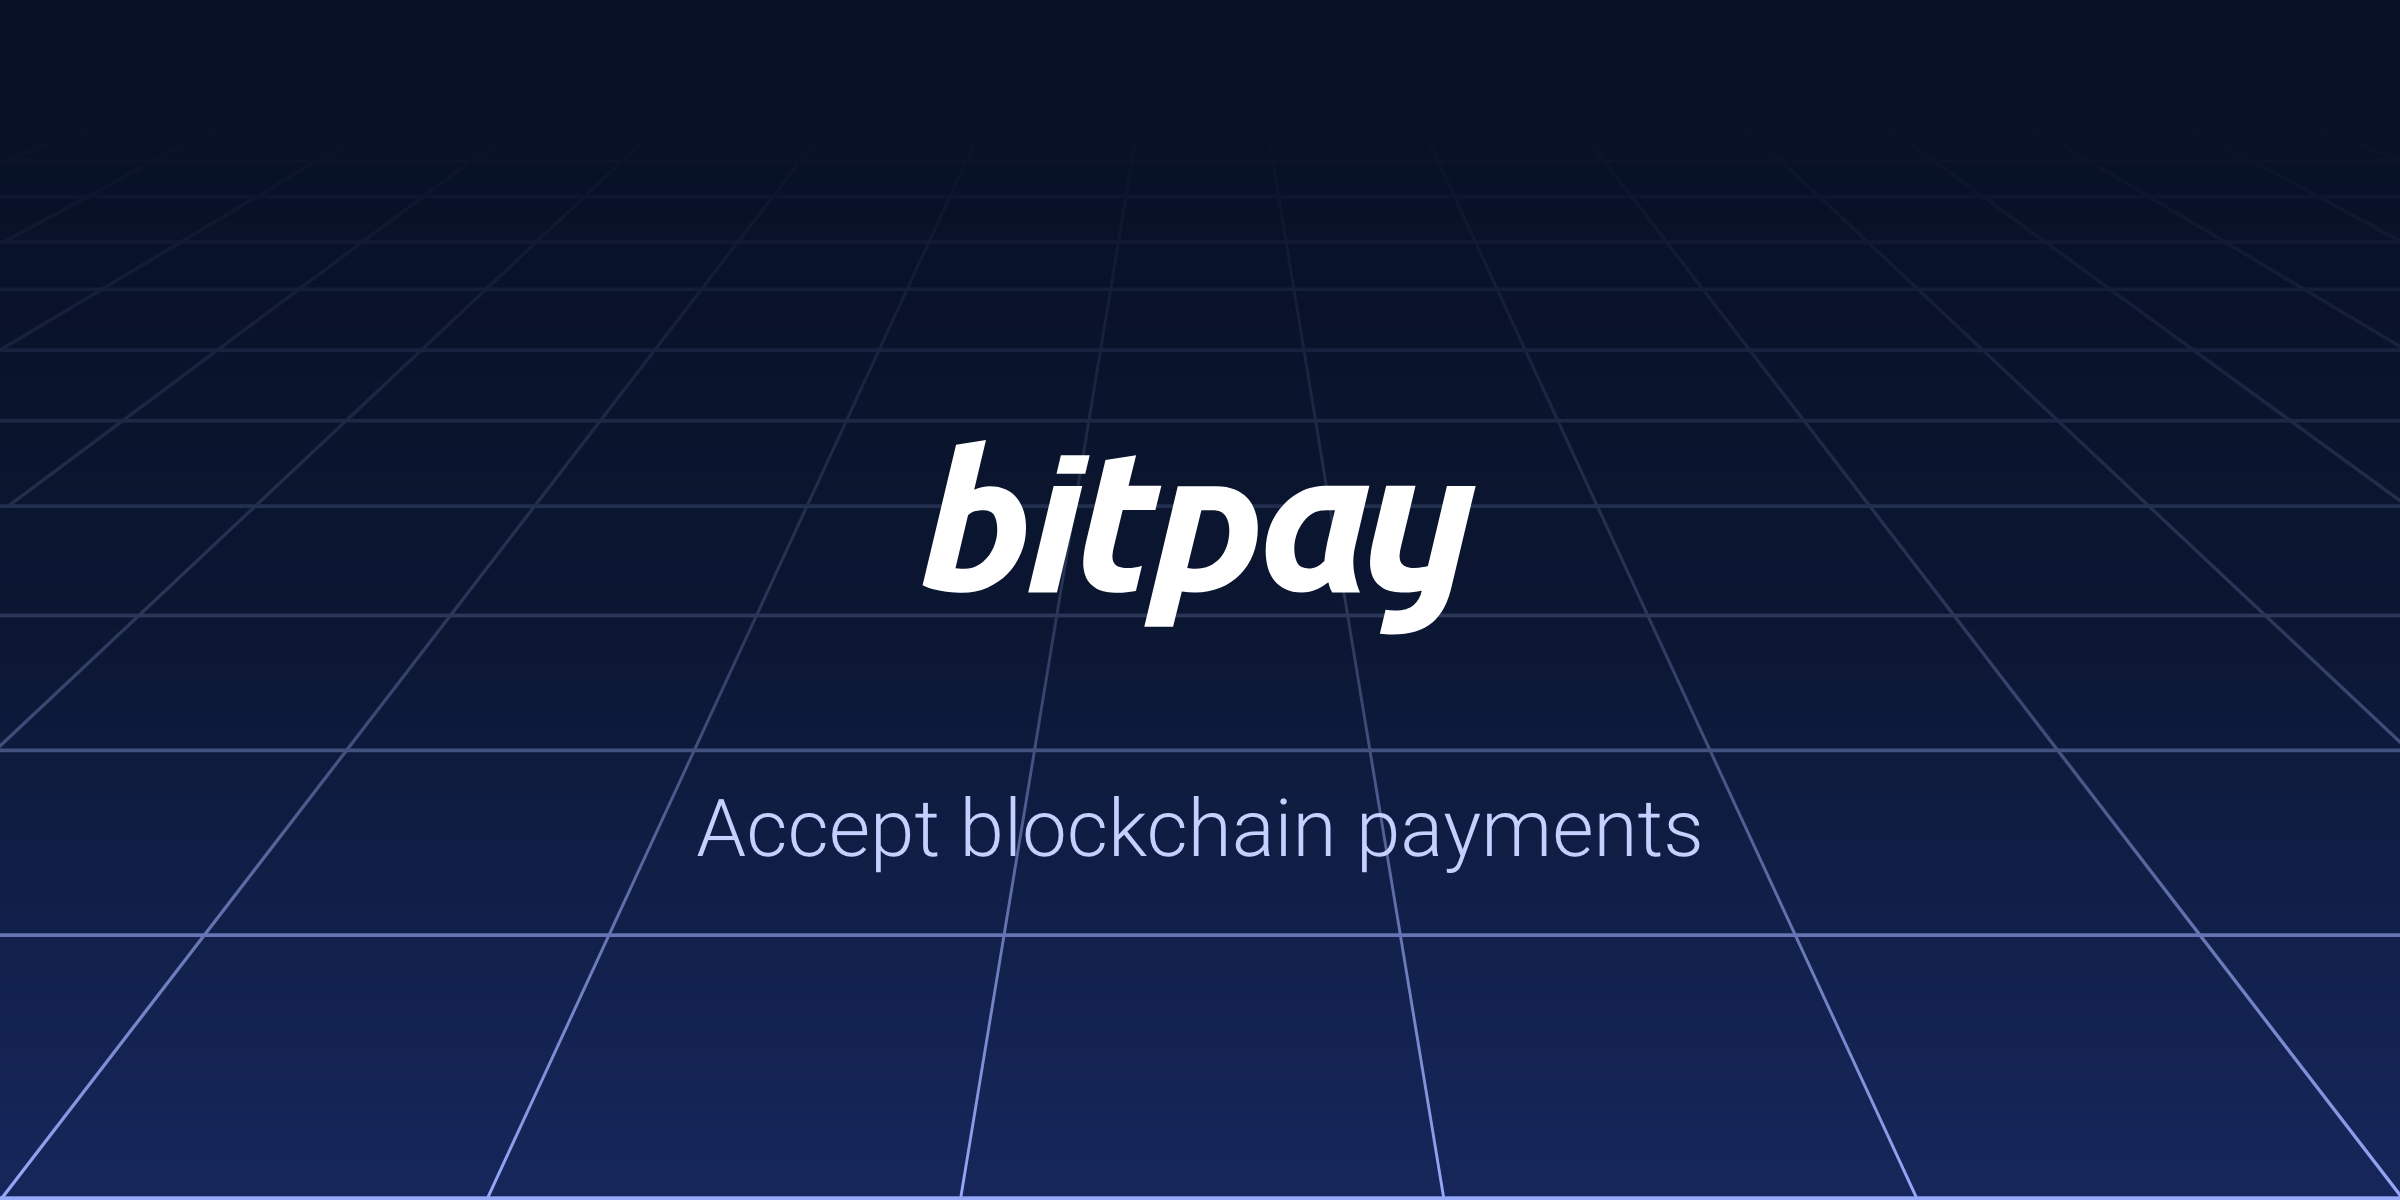 Bitpay Welcome To The Future Of Payments - 